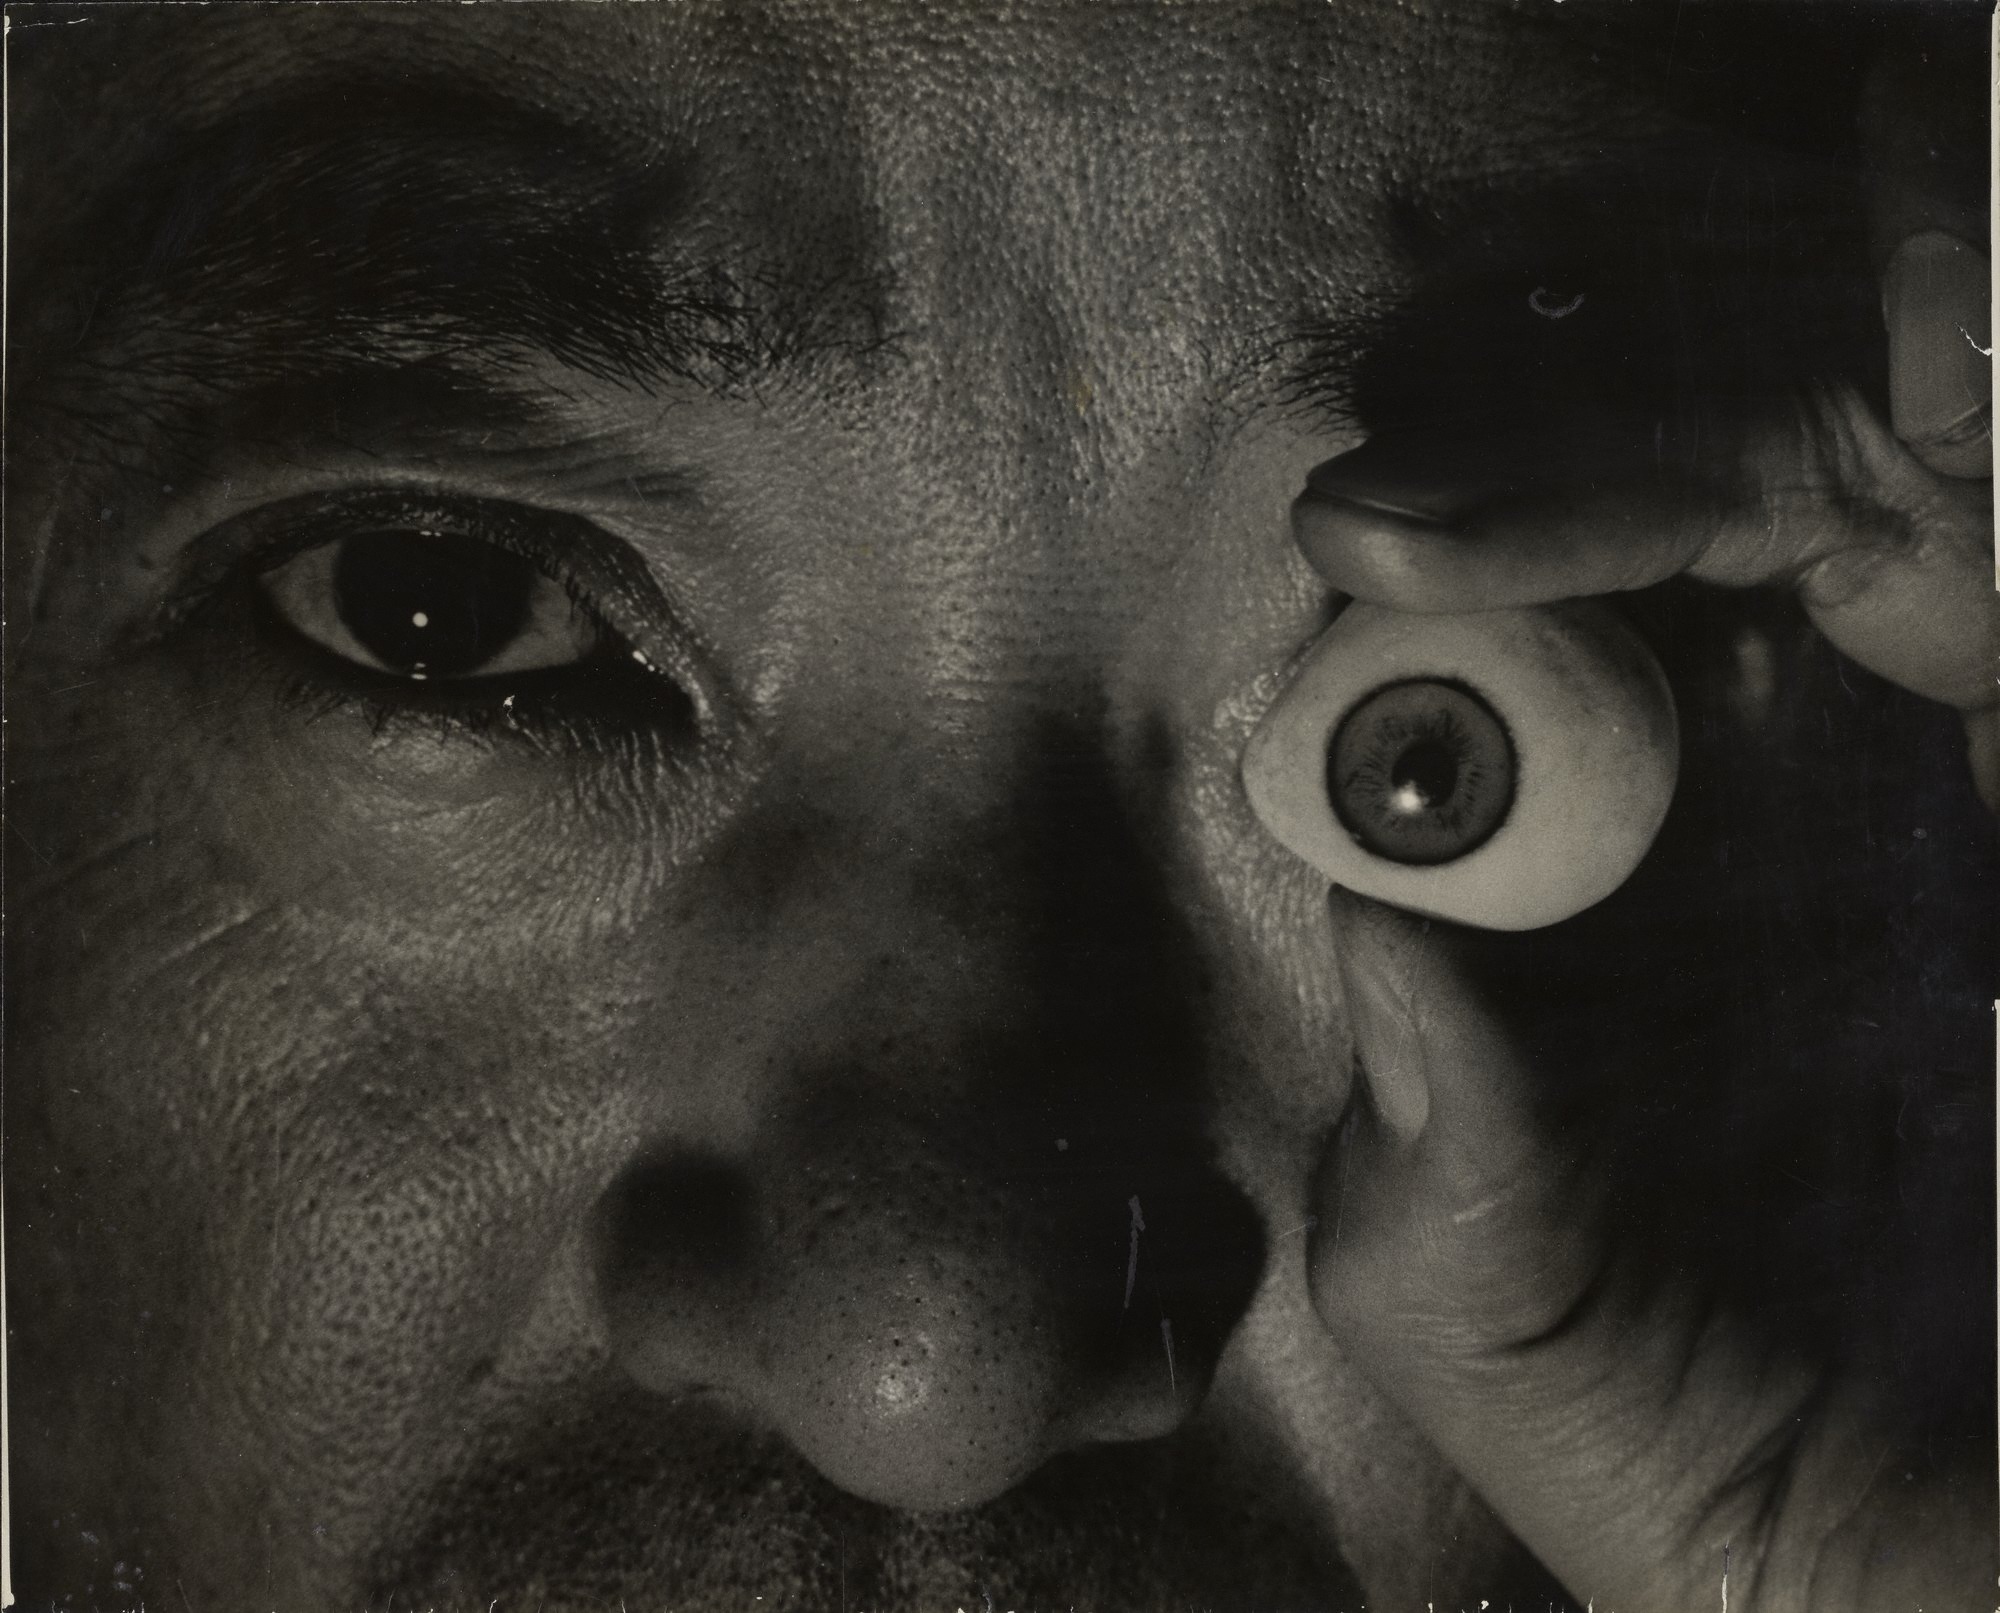 "Self-portrait" (1940) by Kansuke Yamamoto, gelatin silver print, © Toshio Yamamoto, private collection, entrusted to Tokyo Metropolitan Museum of Photography.